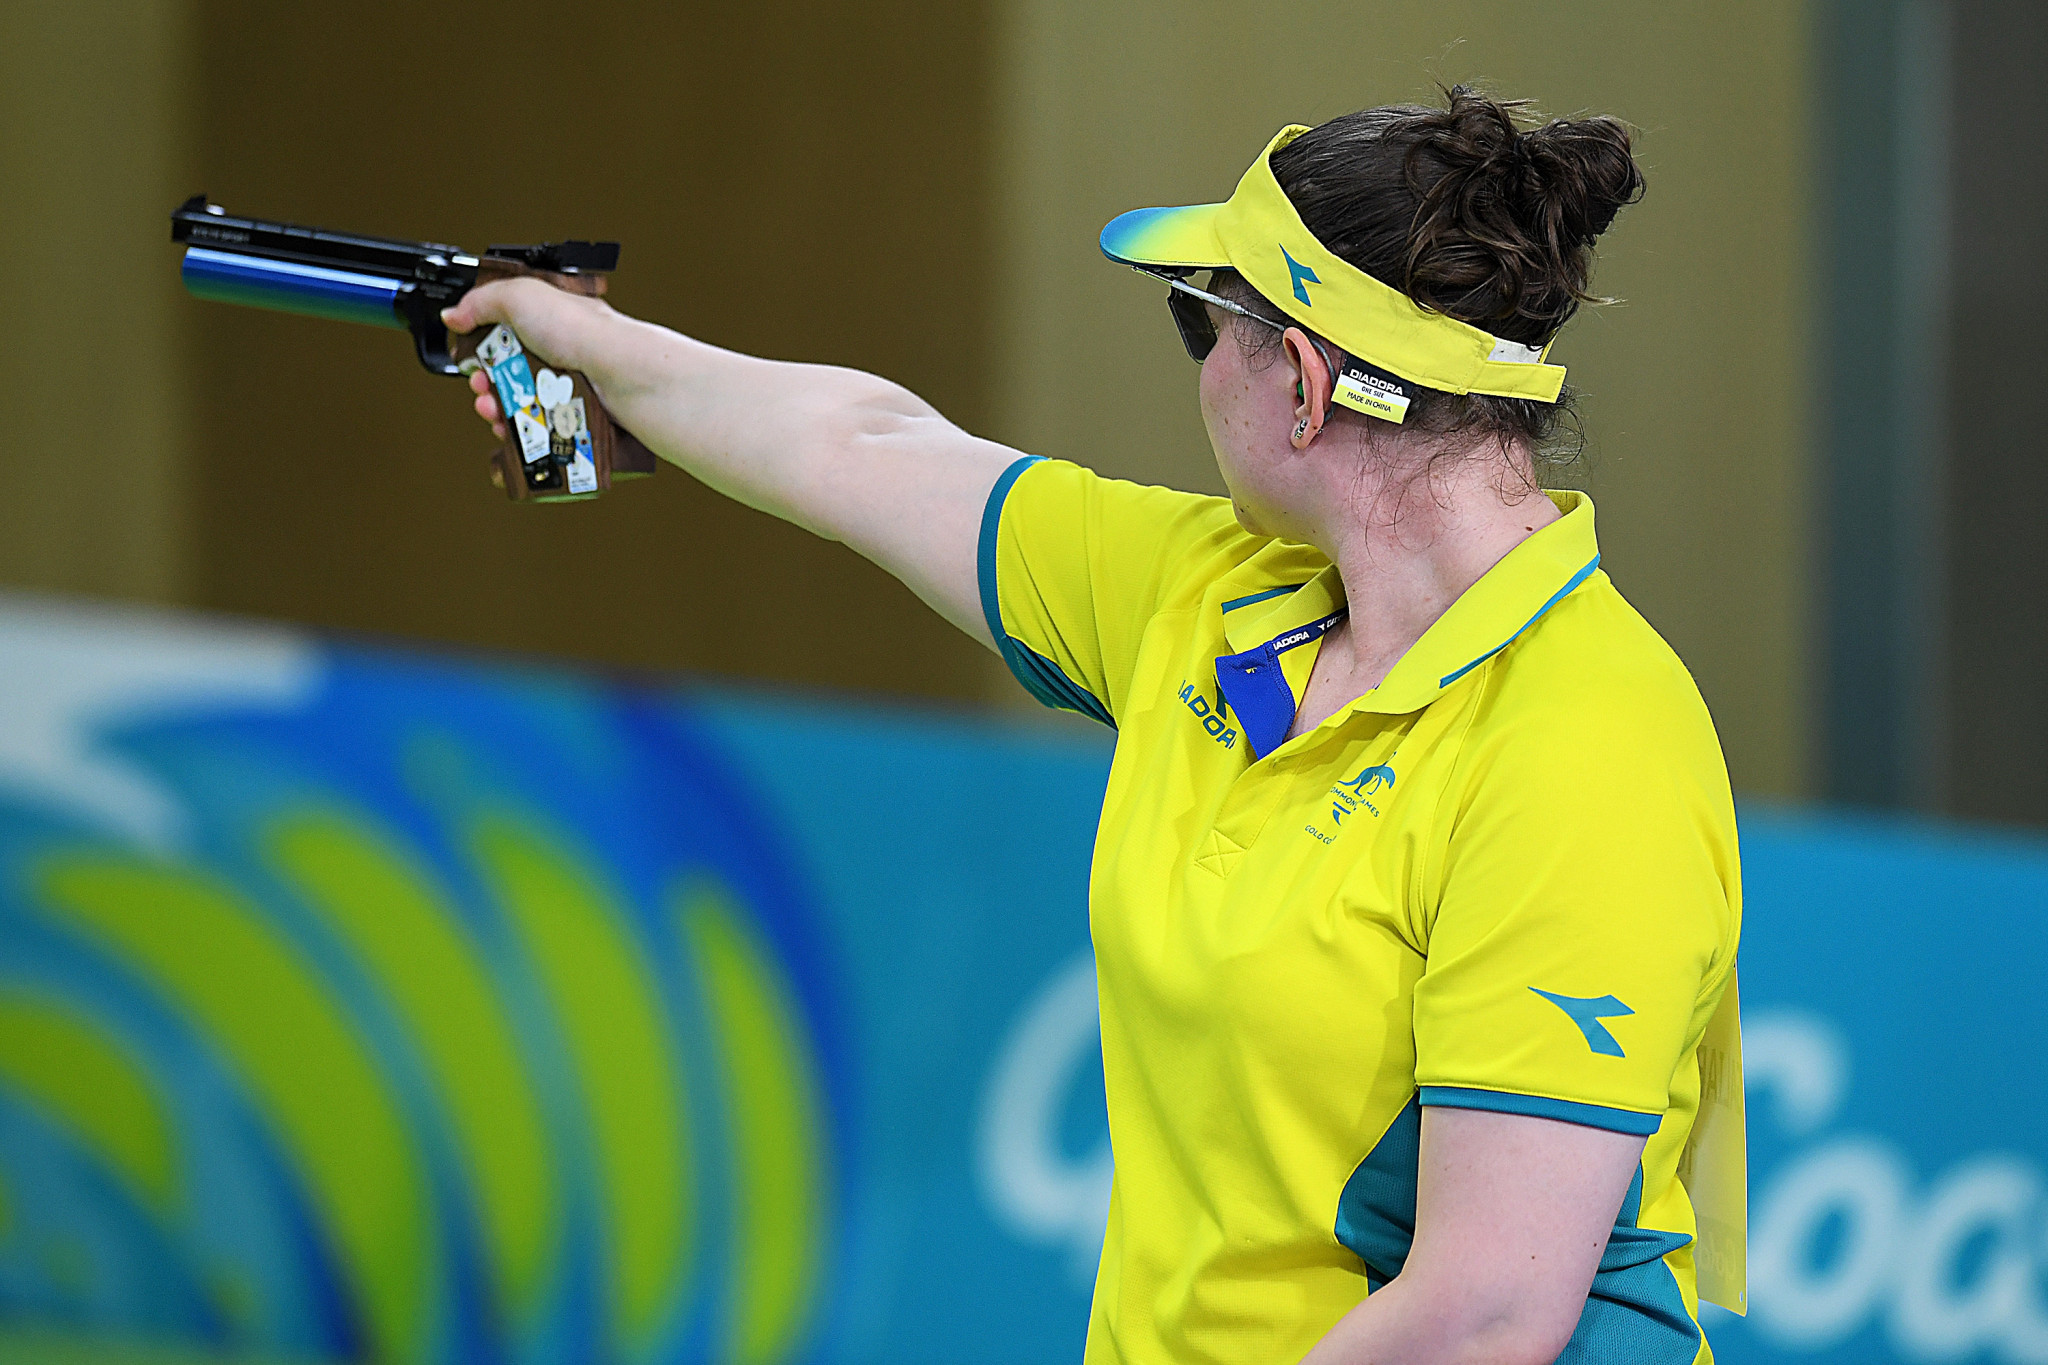 Olympians chasing Tokyo 2020 quota places at Oceania Shooting Championship